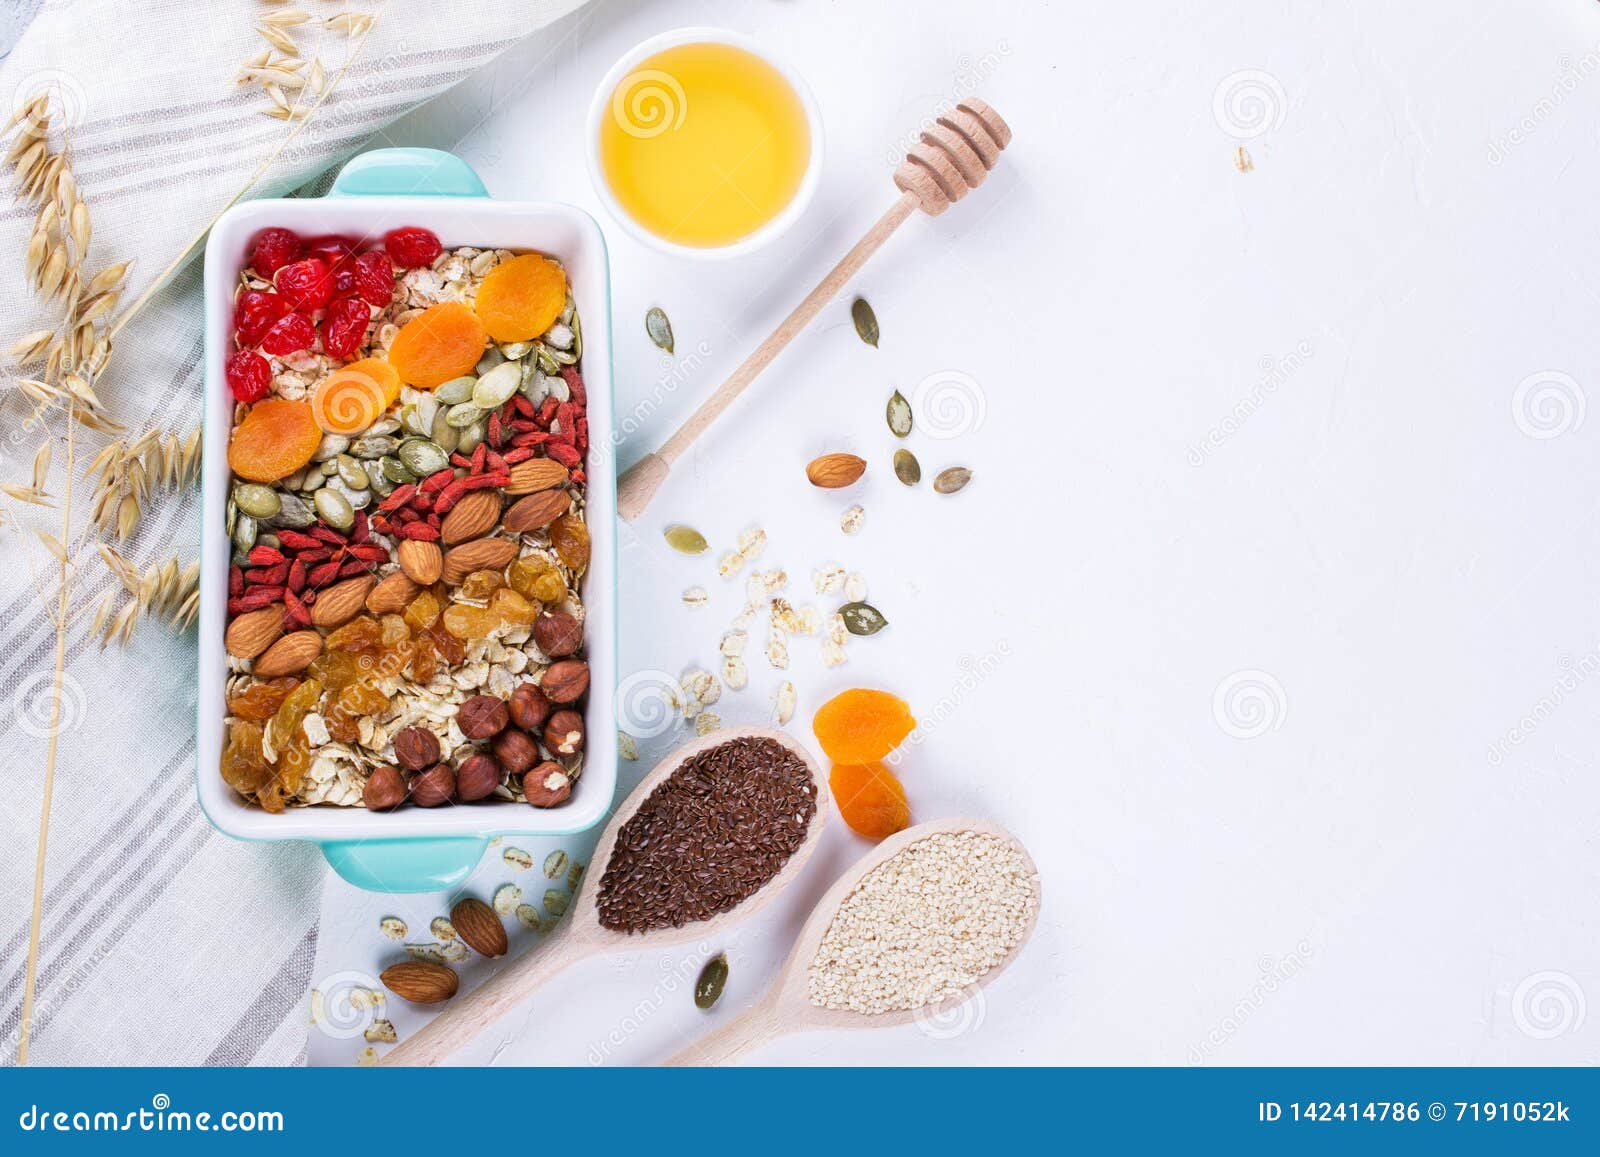 Oat Flakes Baking Tray and Various Delicious Ingredients for Healthy ...